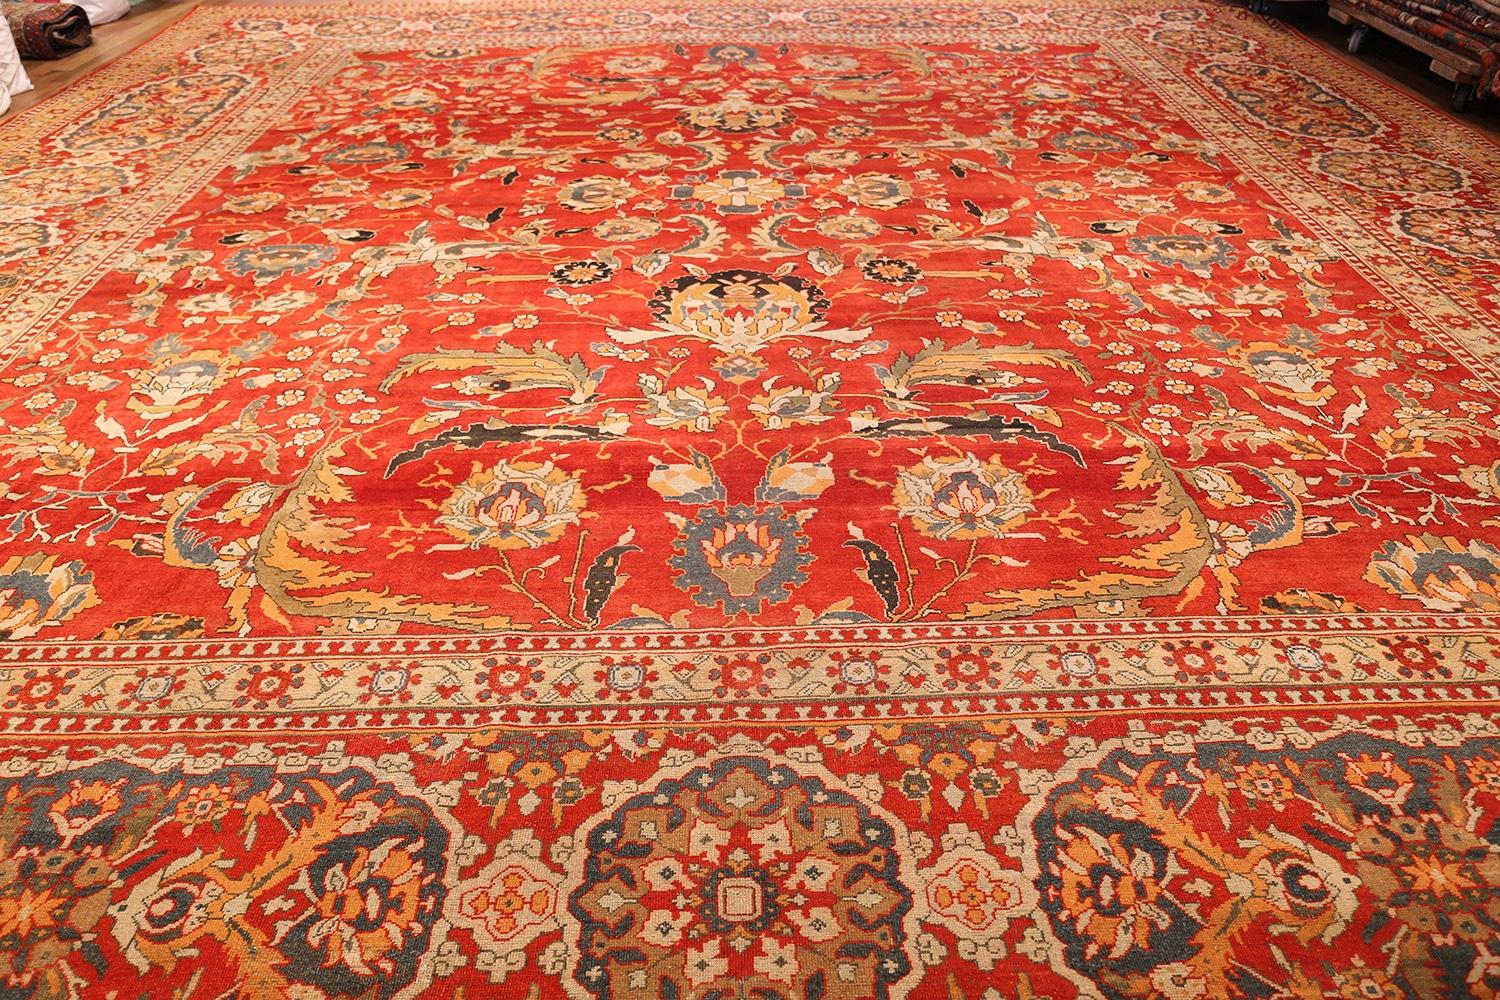 A Magnificent and Happy Large Square Antique Agra Indian Rug, Origin: India, Circa: Late 19th Century. Size: 18 ft x 19 ft 1 in (5.49 m x 5.82 m)

The splendor of classic Mughal court carpets is alive and well in this elegantly opulent antique Agra.